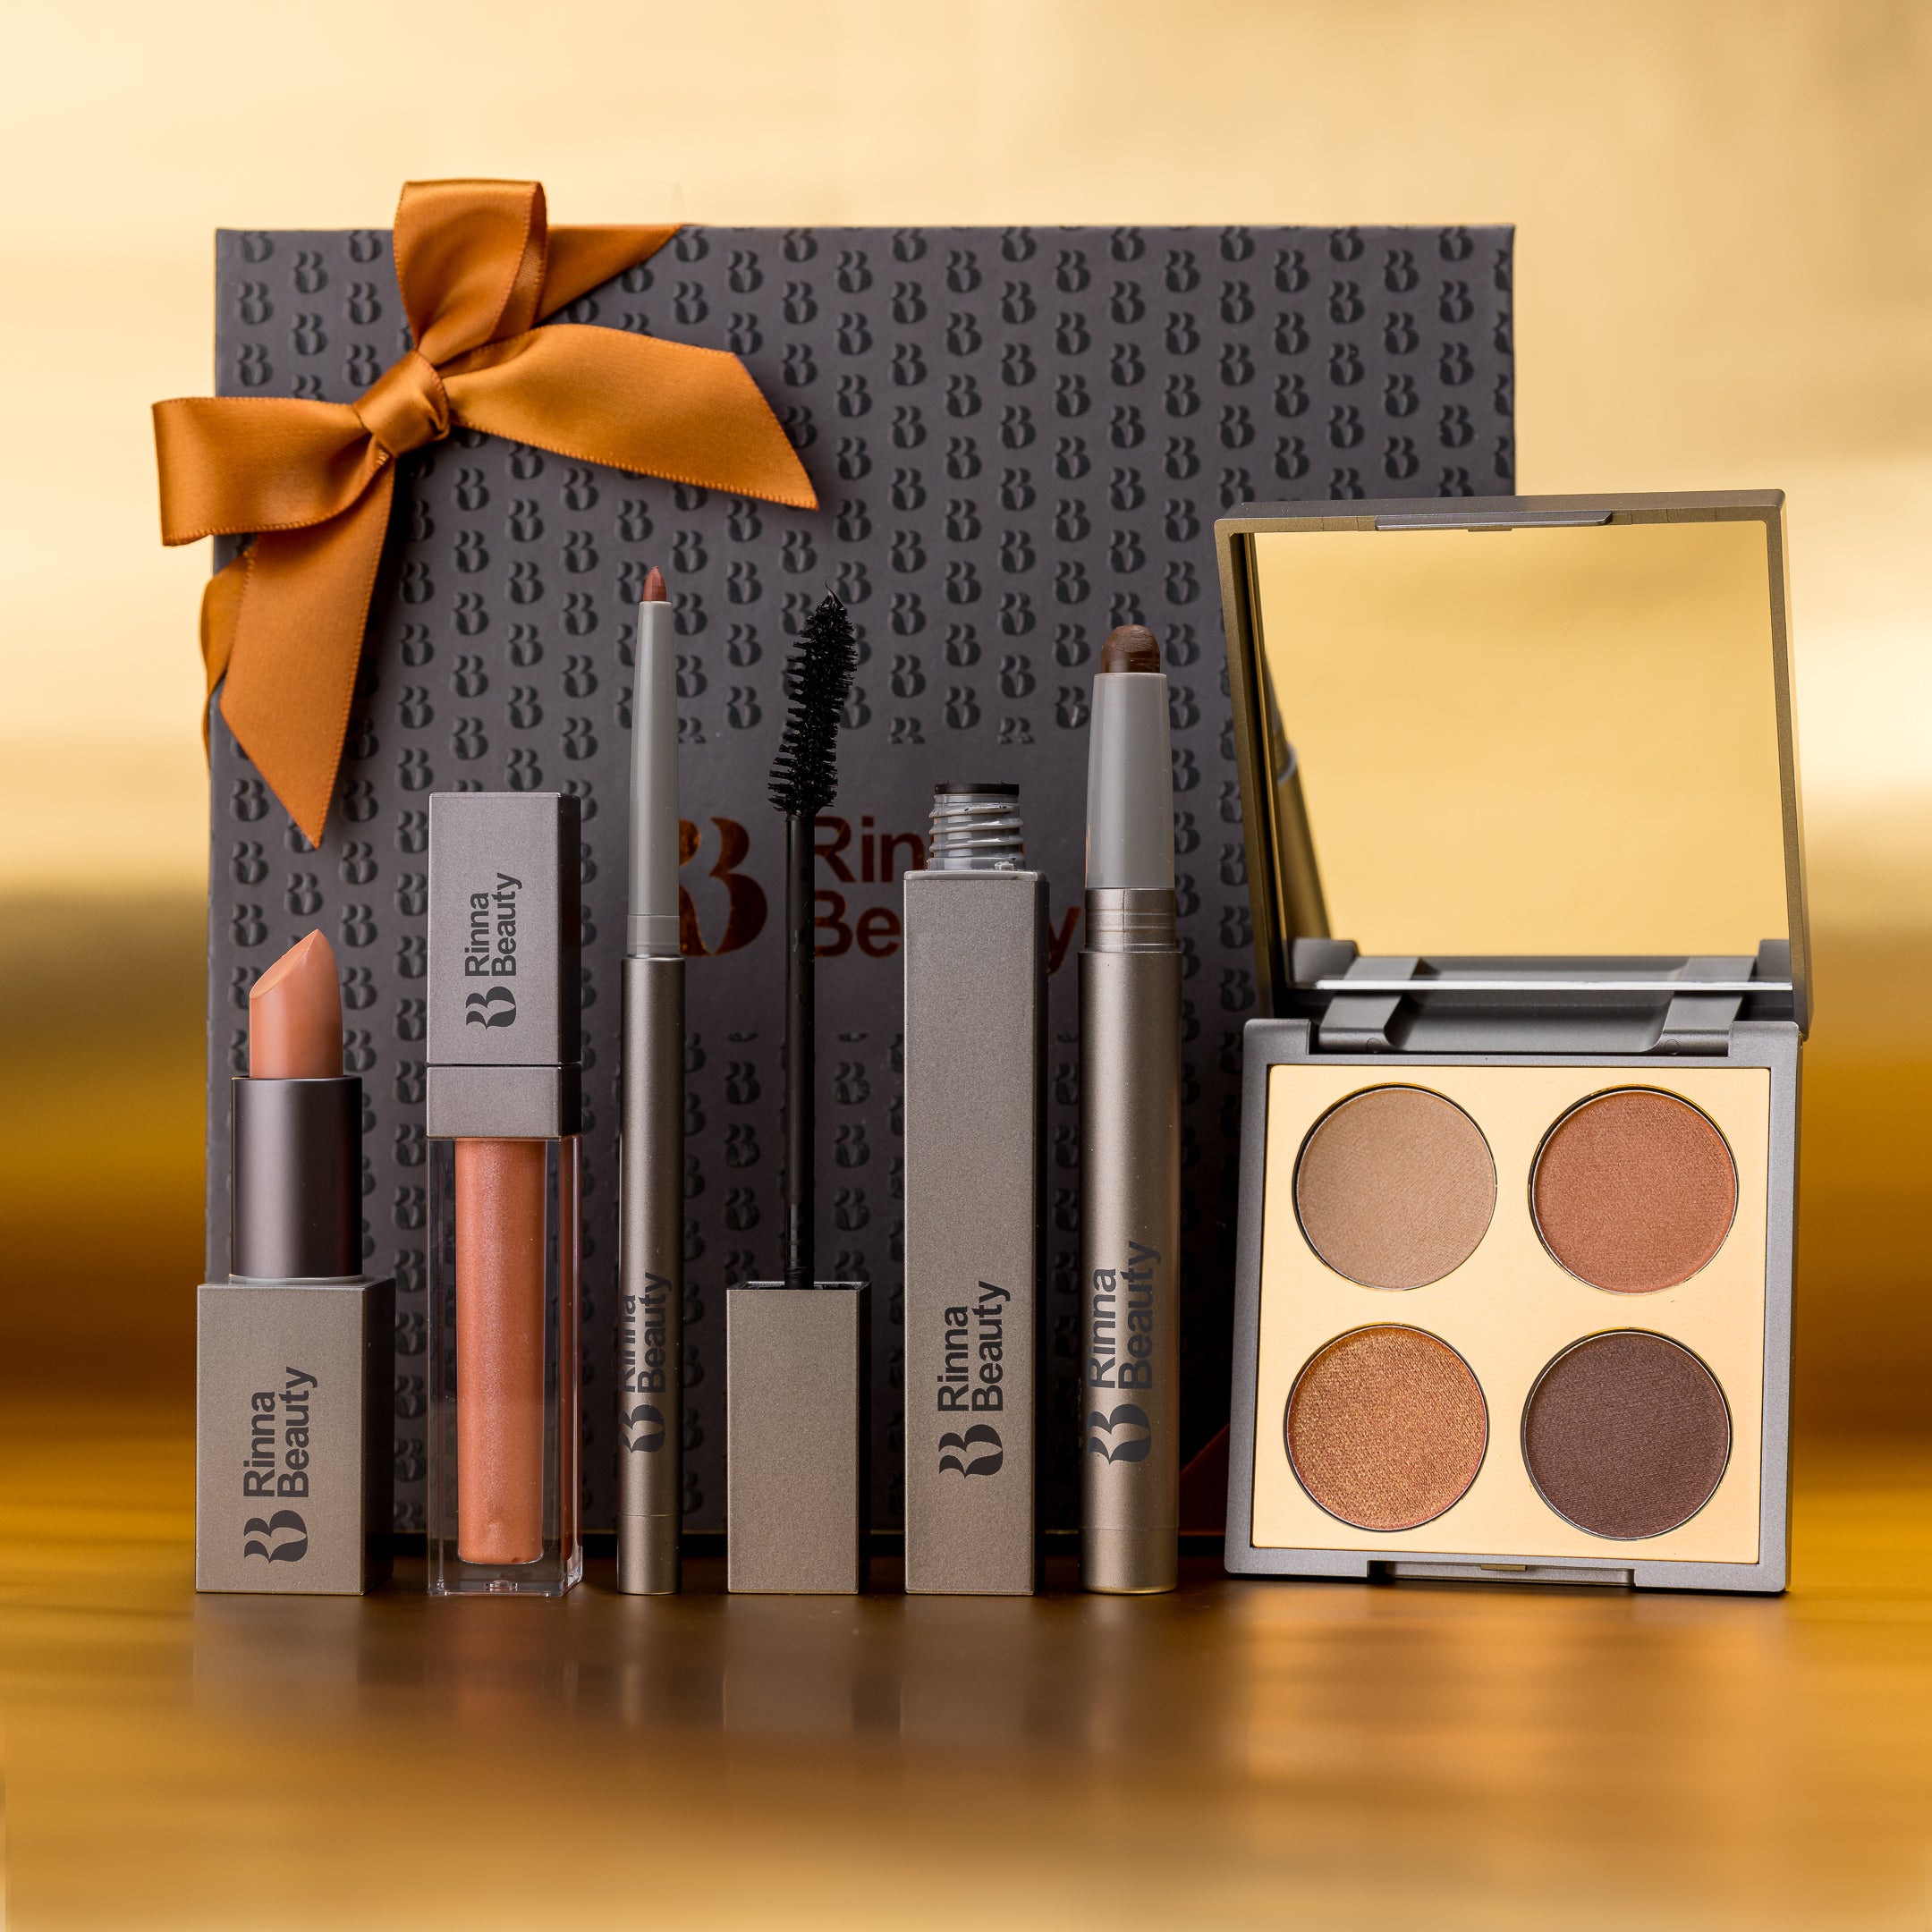 THE PERFECT NUDE KIT